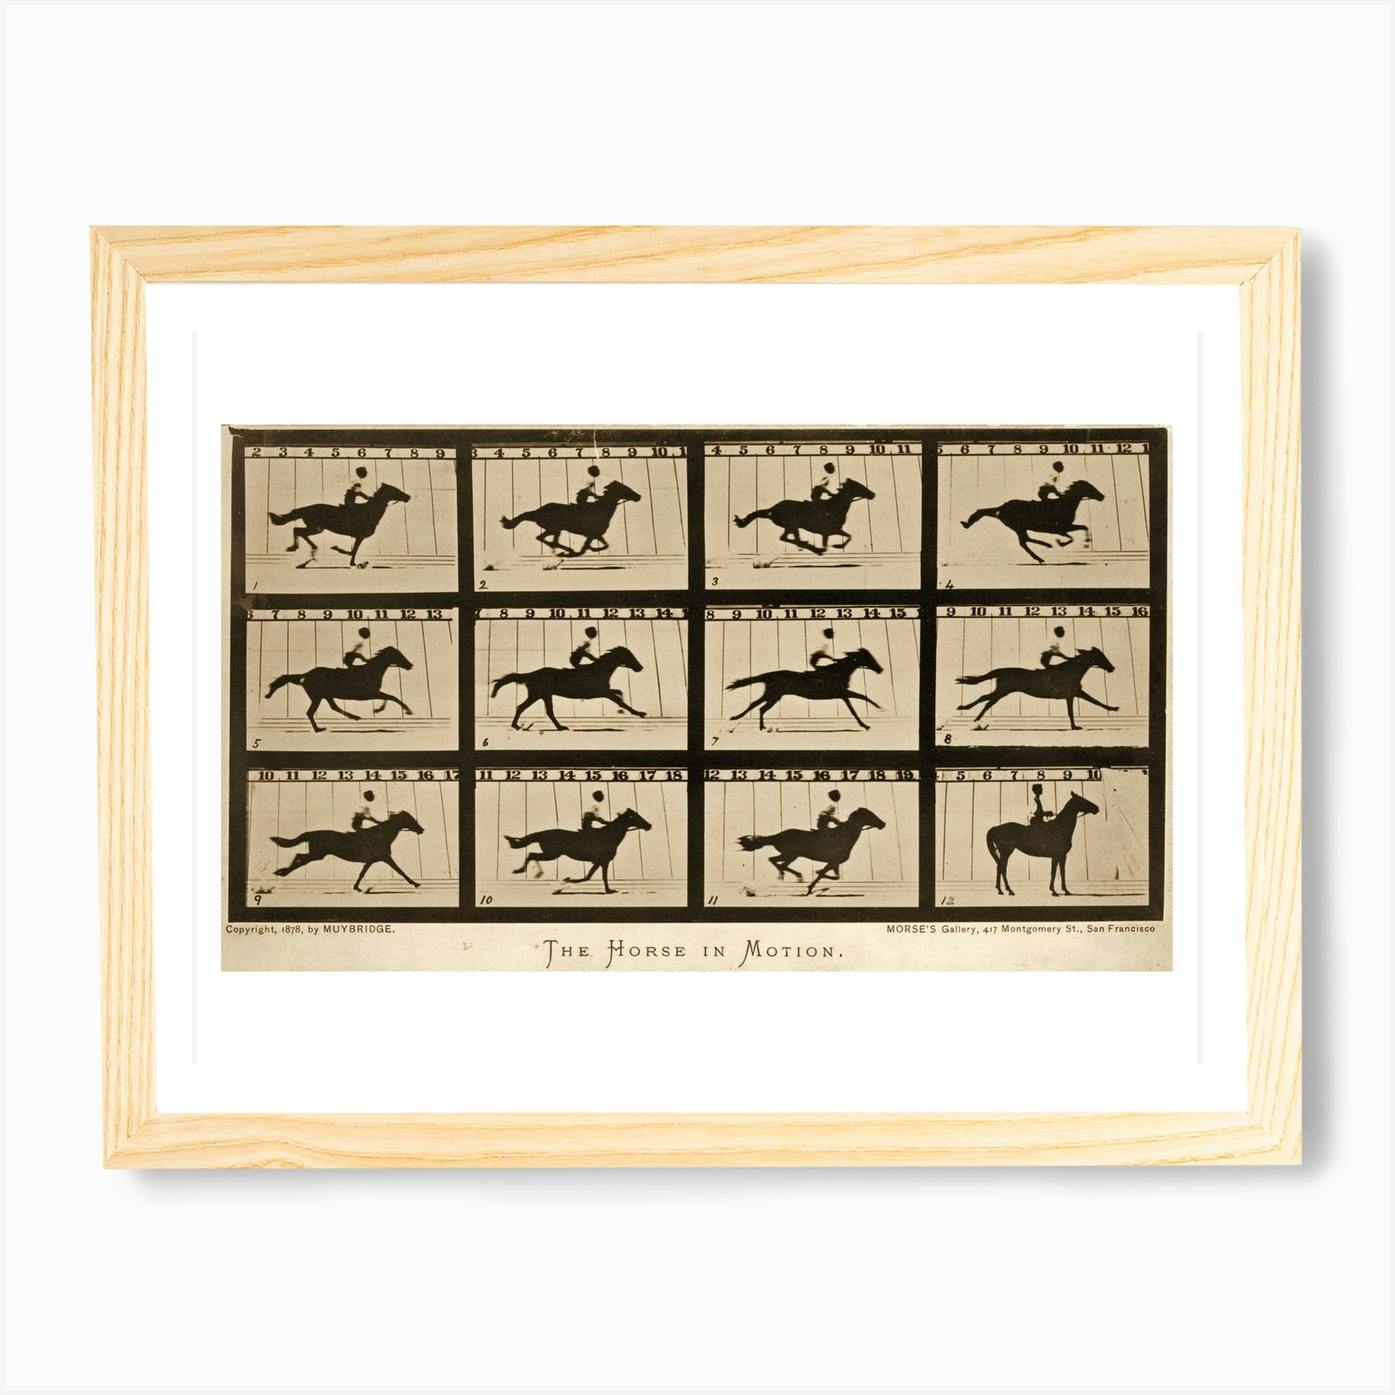 Motion　Print　Locomotion　Art　Animal　In　Horse　The　Fy　Photography　by　Vintage　Collection